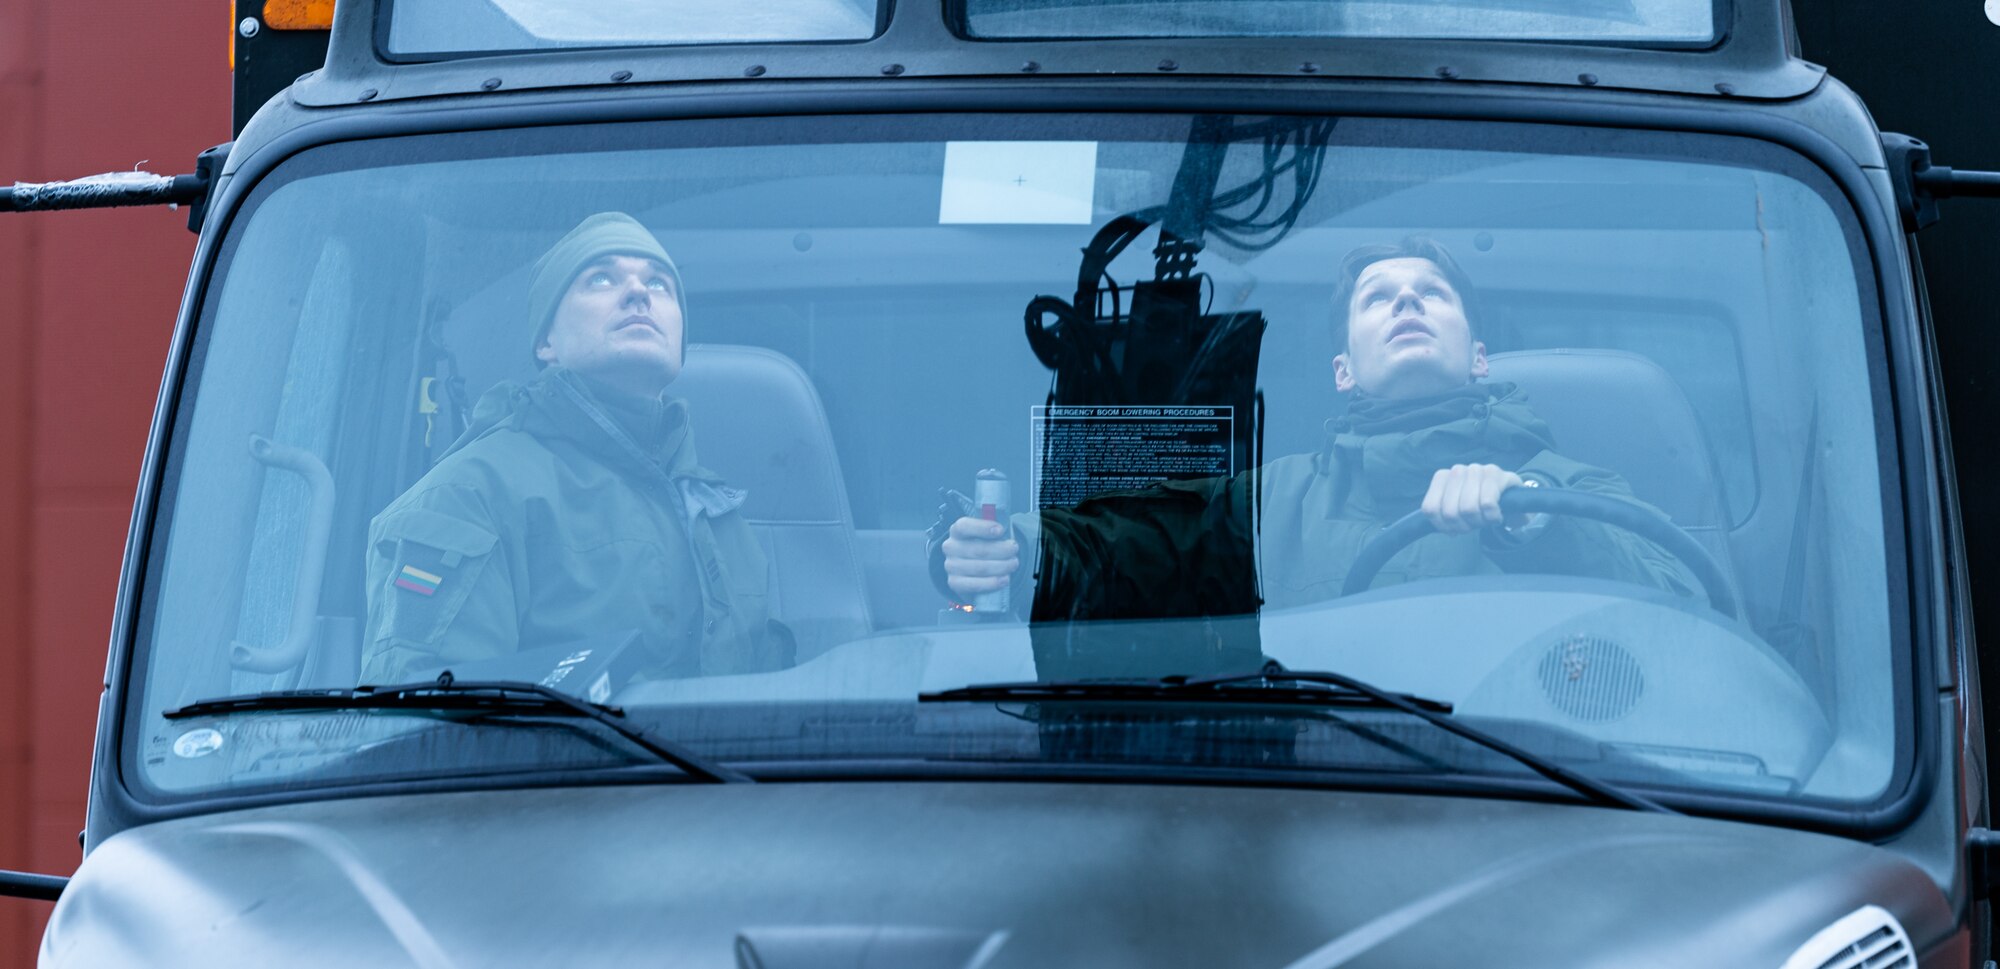 Lithuanian air force airman Gytis Beresnevicius, Terminal Operation Squadron liquid section specialist, right, and Airman 1st Class Darius Leckauskas, liquid section specialist, left, control a Global ER-2875 de-icer during emergency training, Jan. 19, 2023, at Šiauliai Air Base, Lithuania. Lithuanian airmen assigned to the TOS perform emergency procedures in case of basket malfunction. (U.S. Air Force photo by Airman 1st Class Edgar Grimaldo)